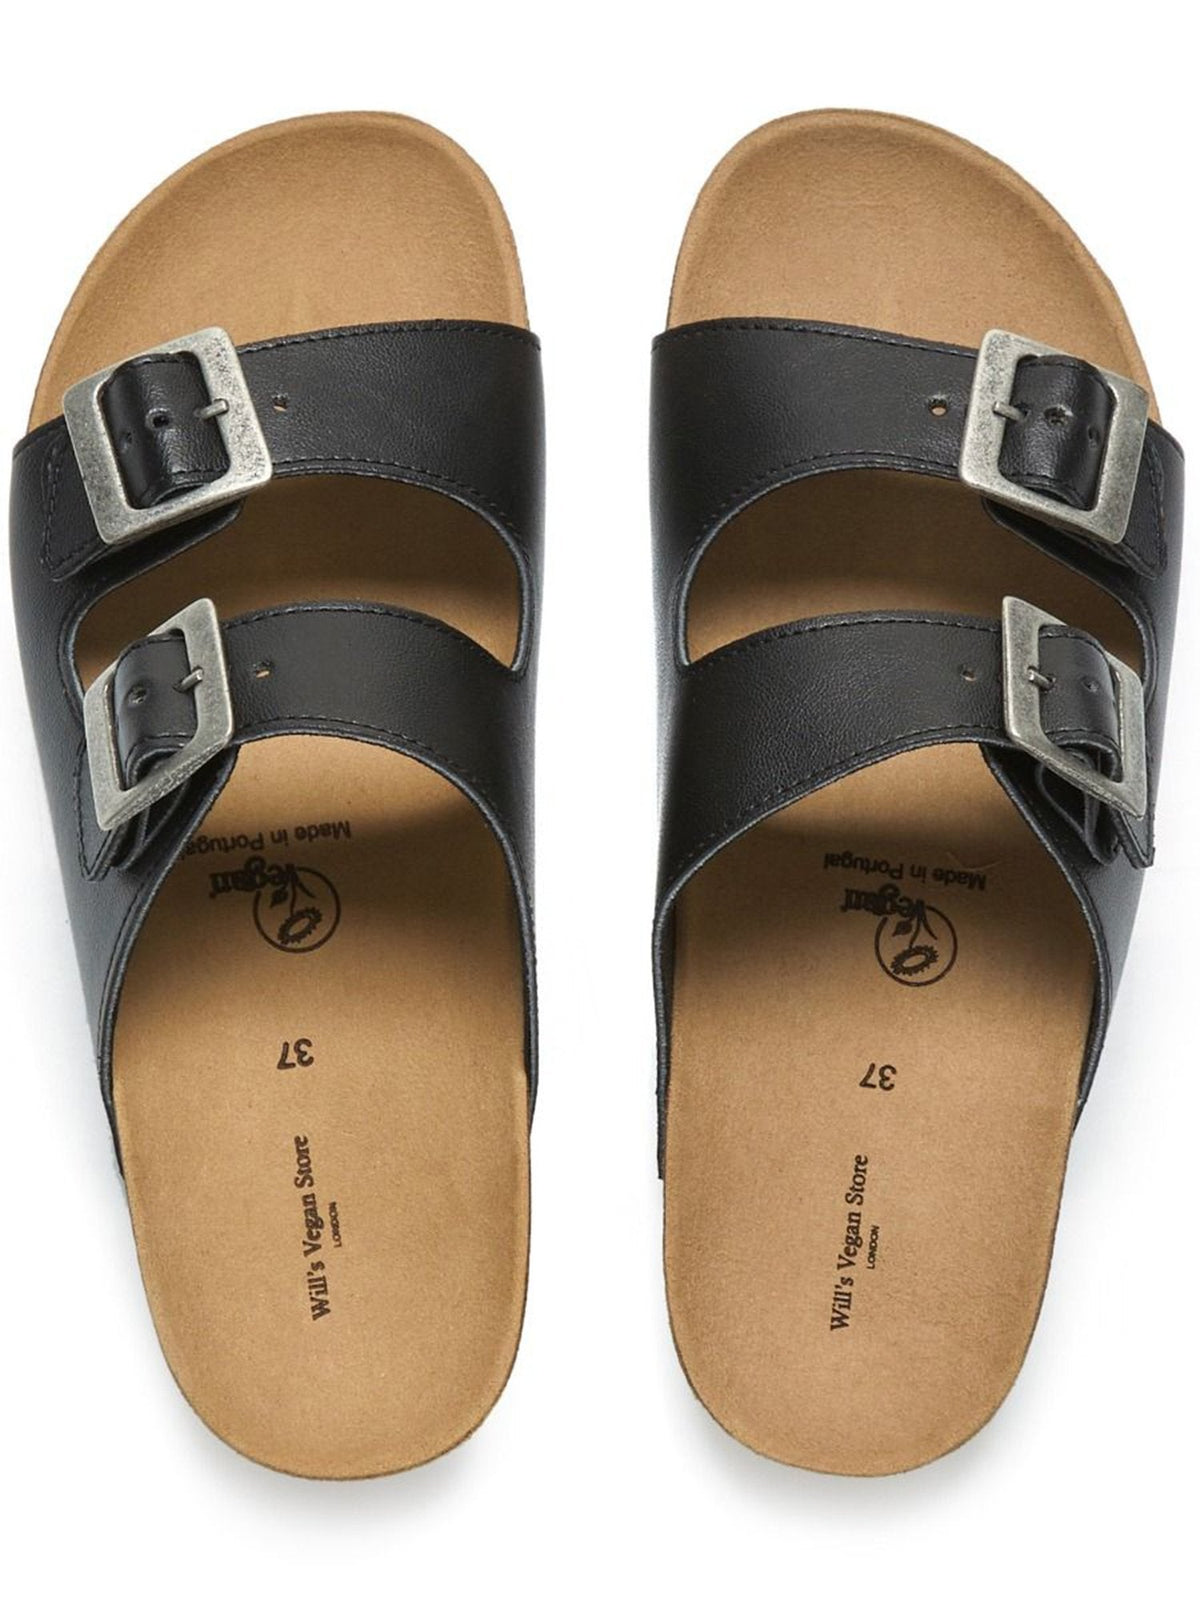 Two Strap Footbed Sandals